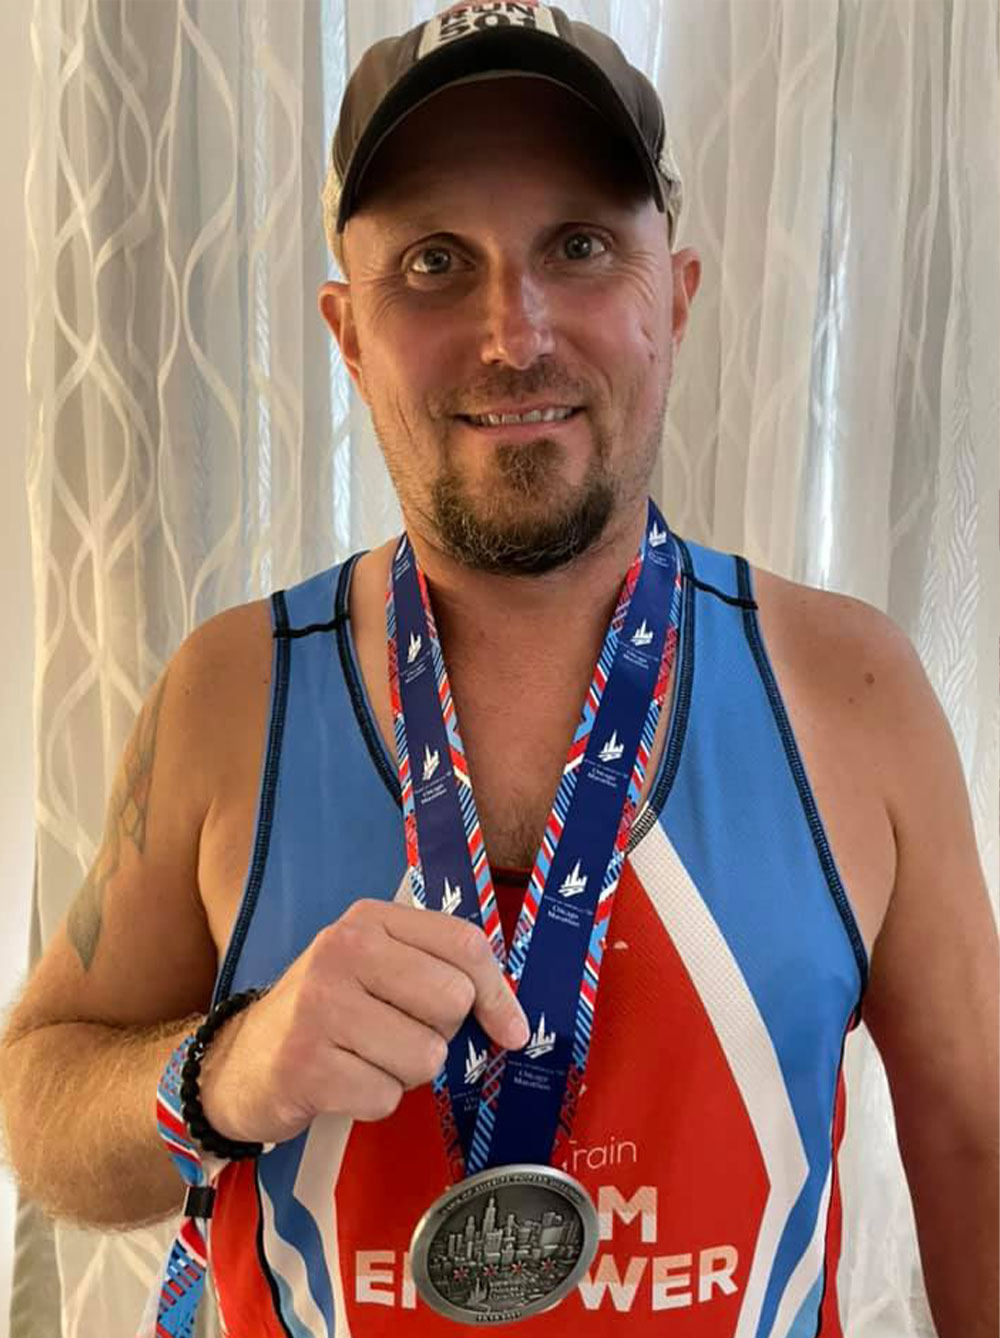 Eddie in his Team EMPOWER singlet with his medal for completing the Chicago Marathon